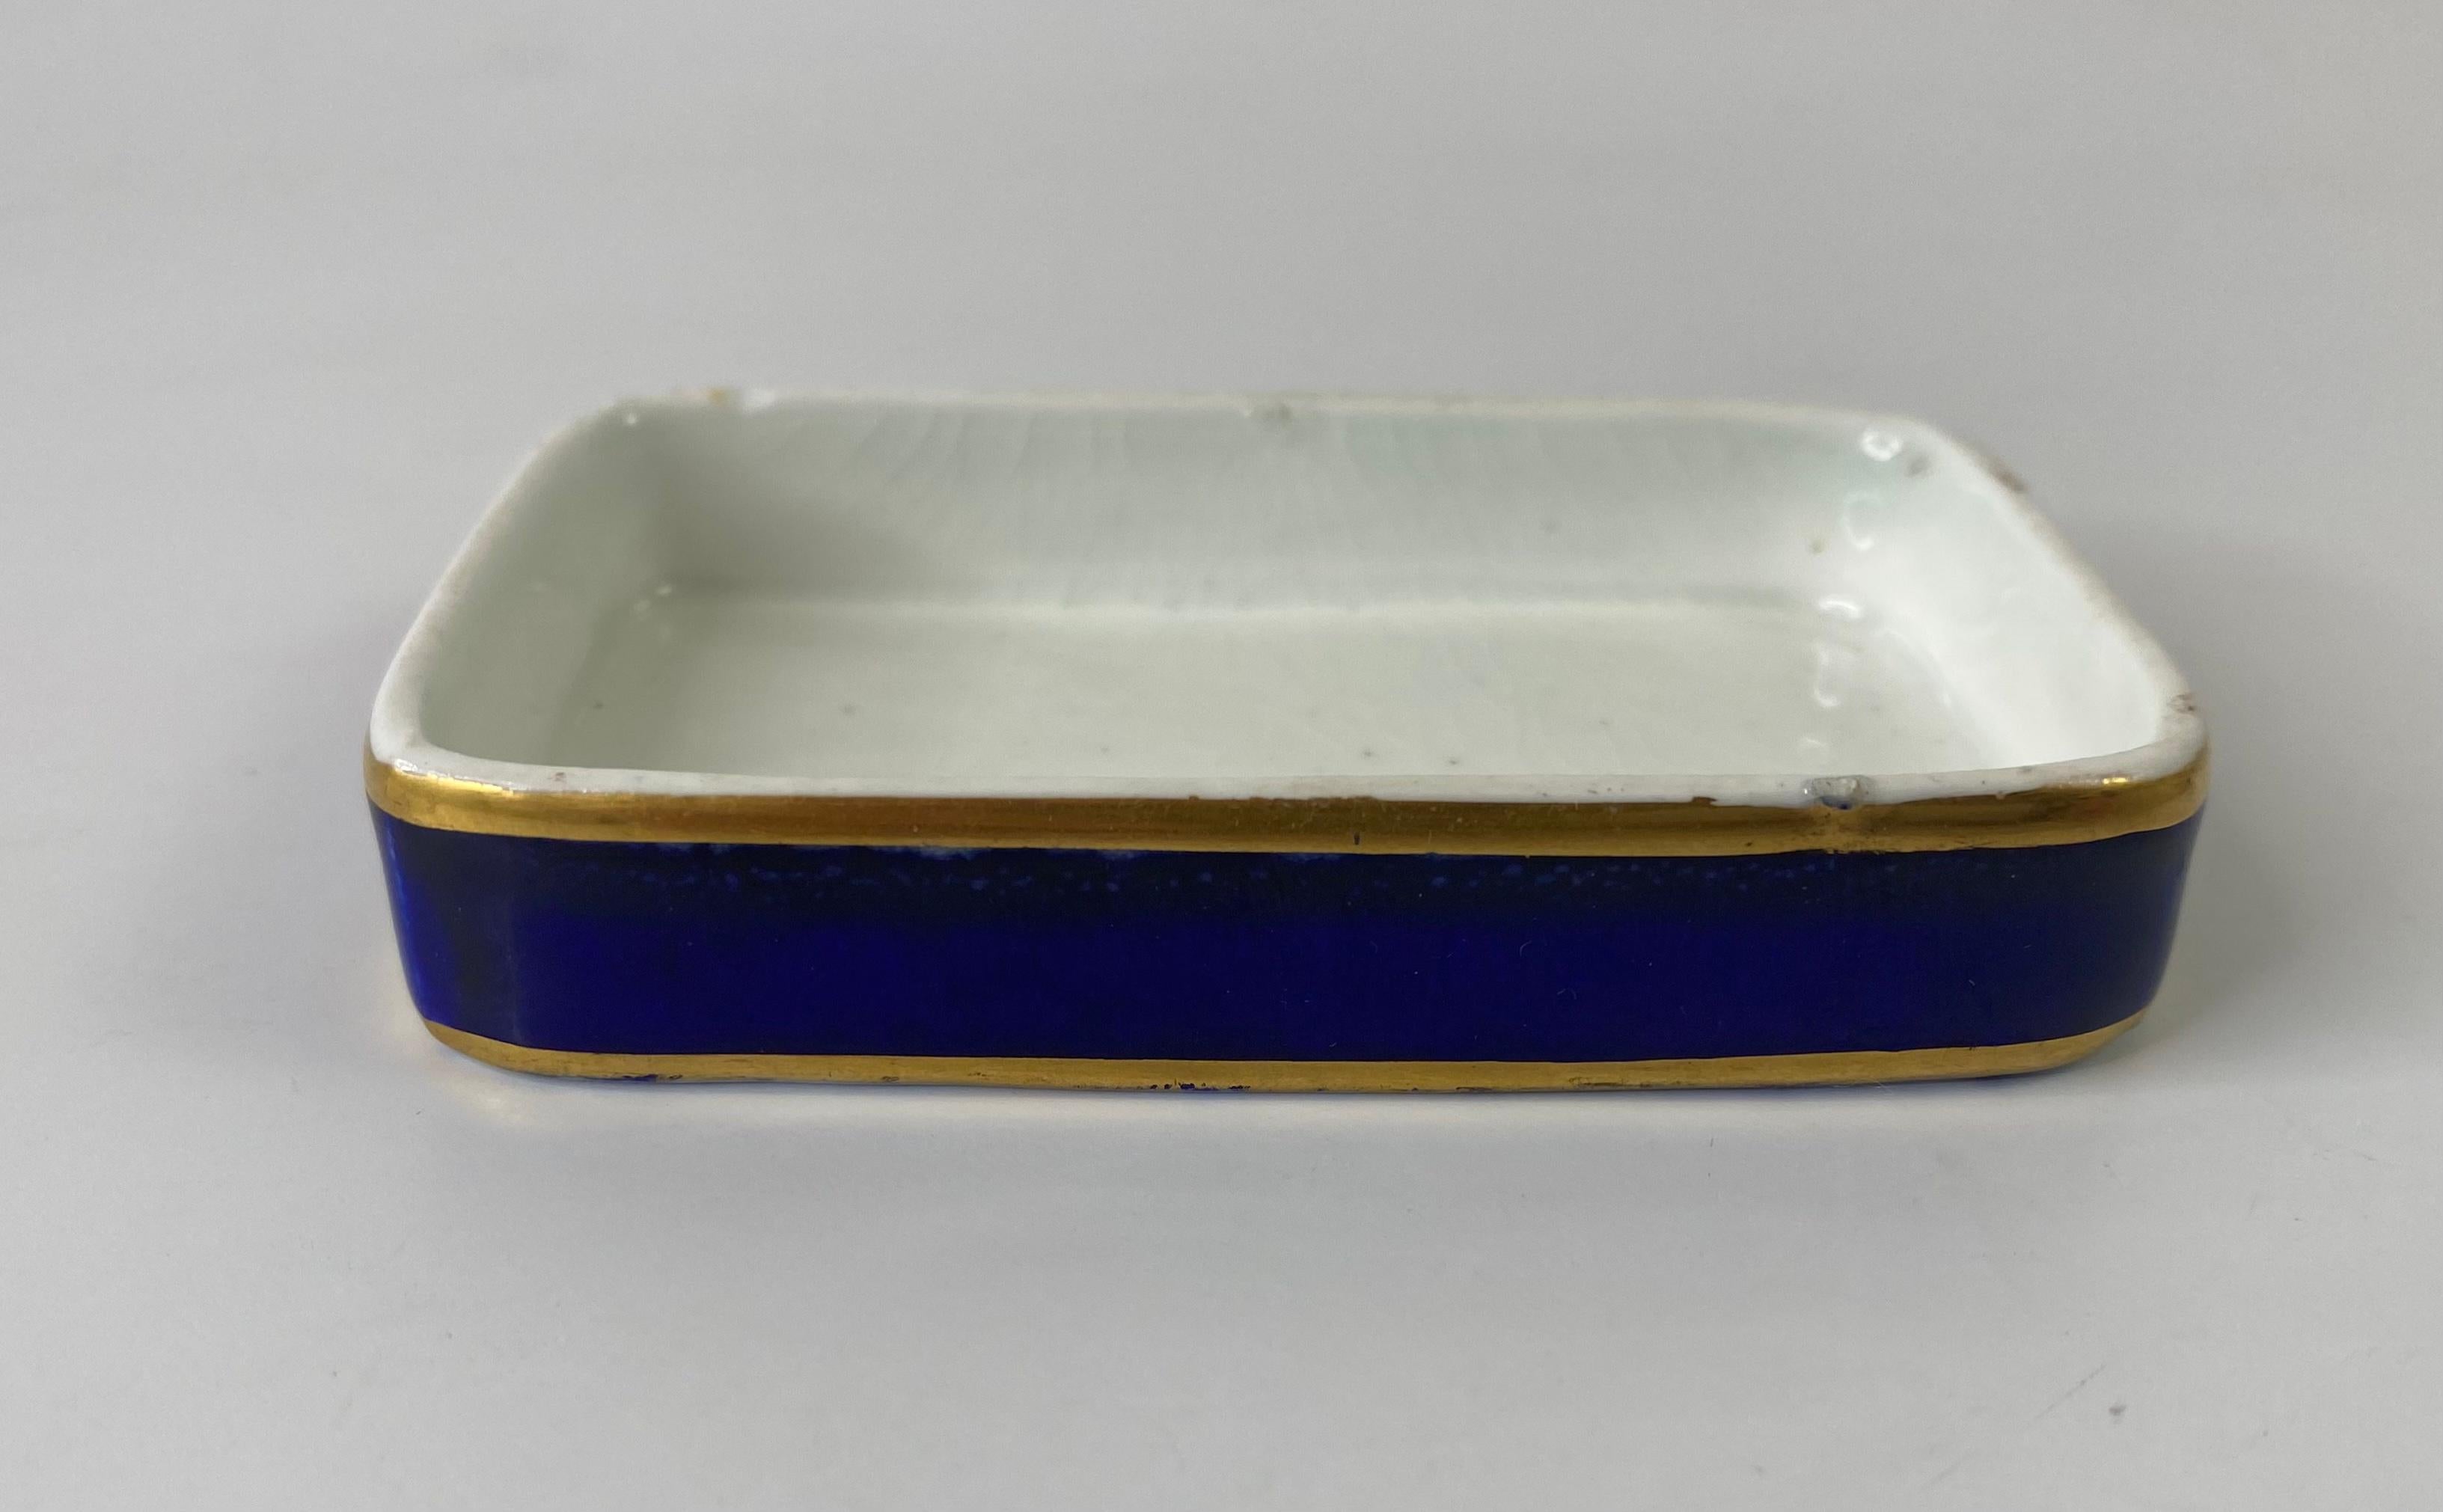 Fired Chamberlain Worcester Porcelain Box and Cover, ‘Malvern’, c. 1840 For Sale